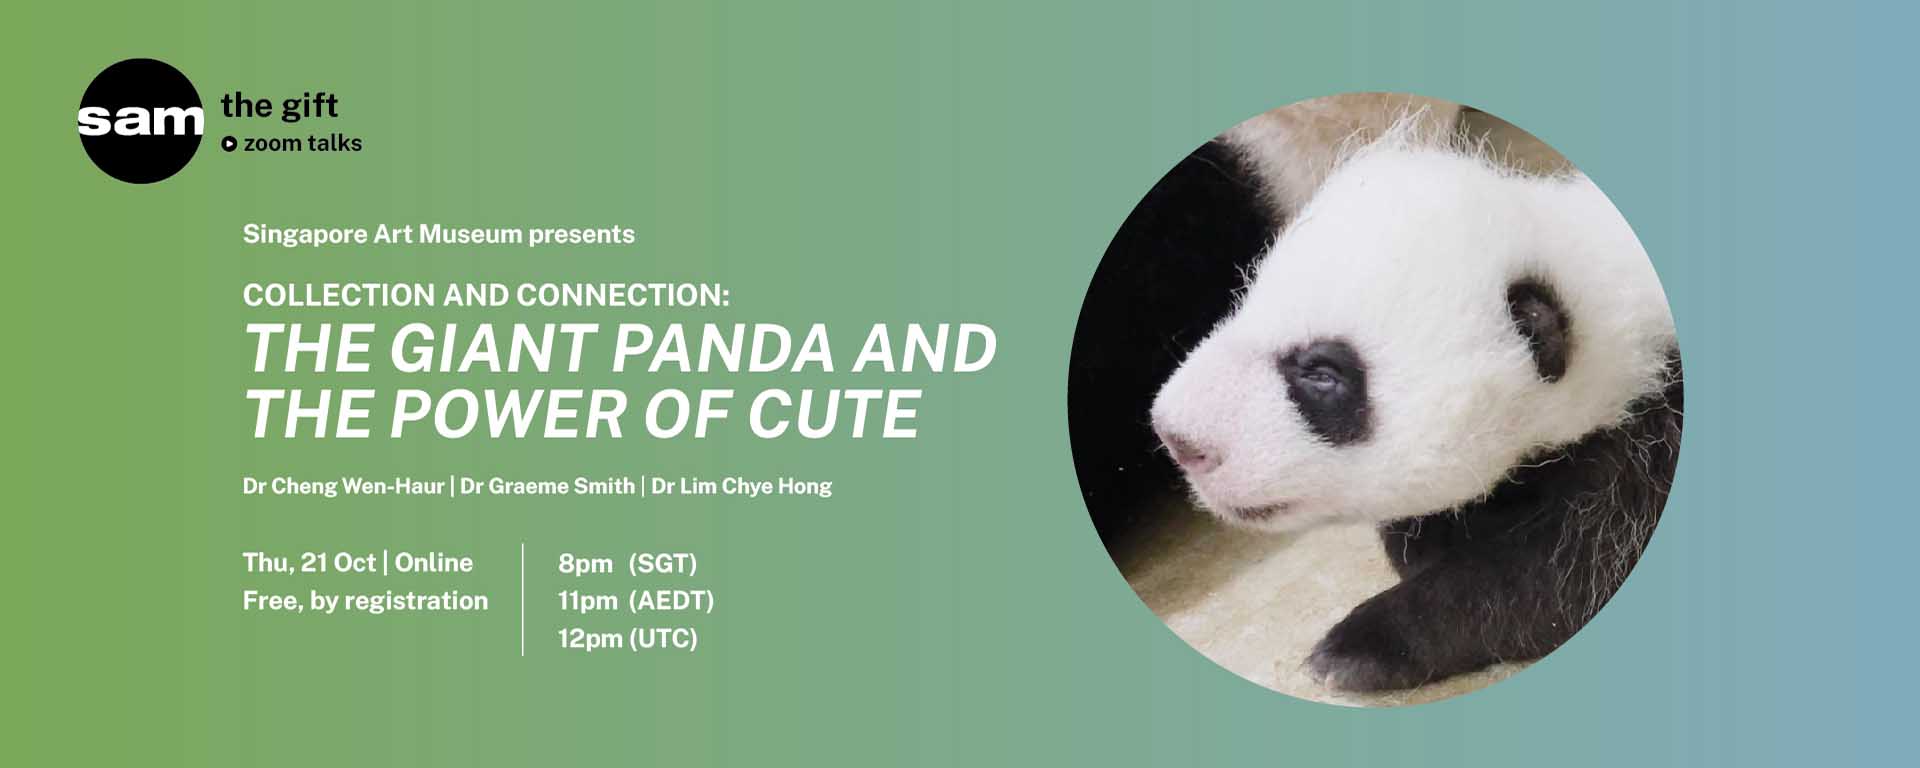 COLLECTION AND CONNECTION: The Giant Panda and The Power of Cute